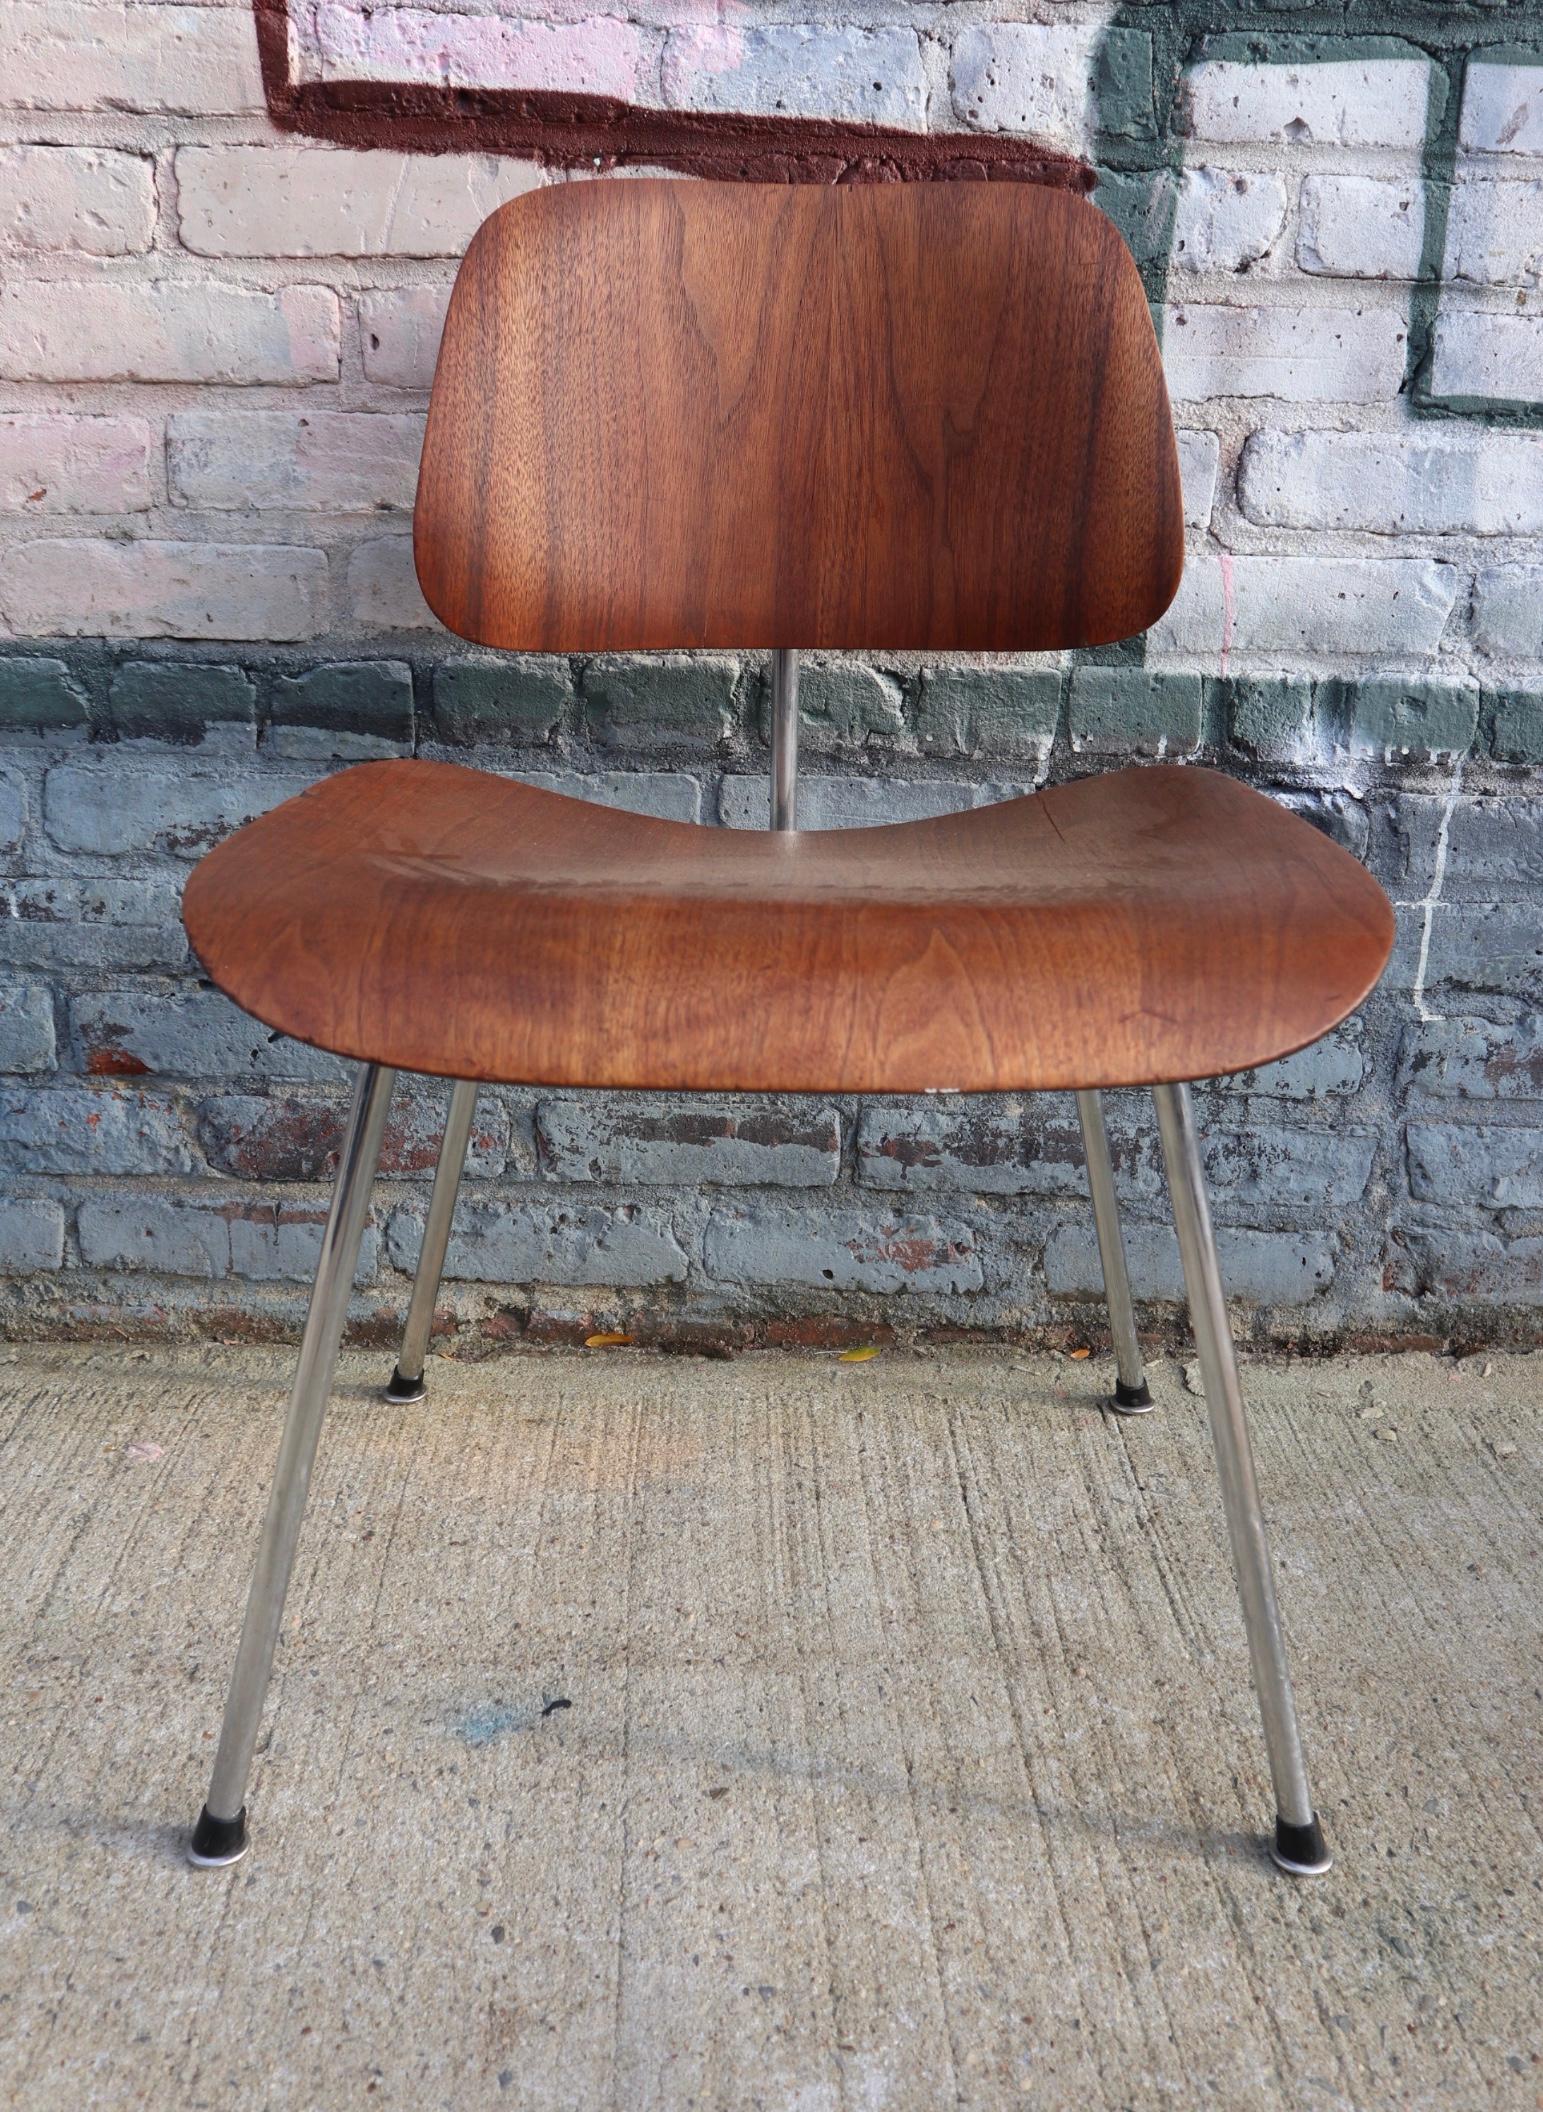 A rare and very early Eames DCM dining chair designed by Charles and Ray Eames and manufactured by Evans products in the 1940s. This is before Herman Miller took over production in 1950. The chair is identifiable as an Evans production by the